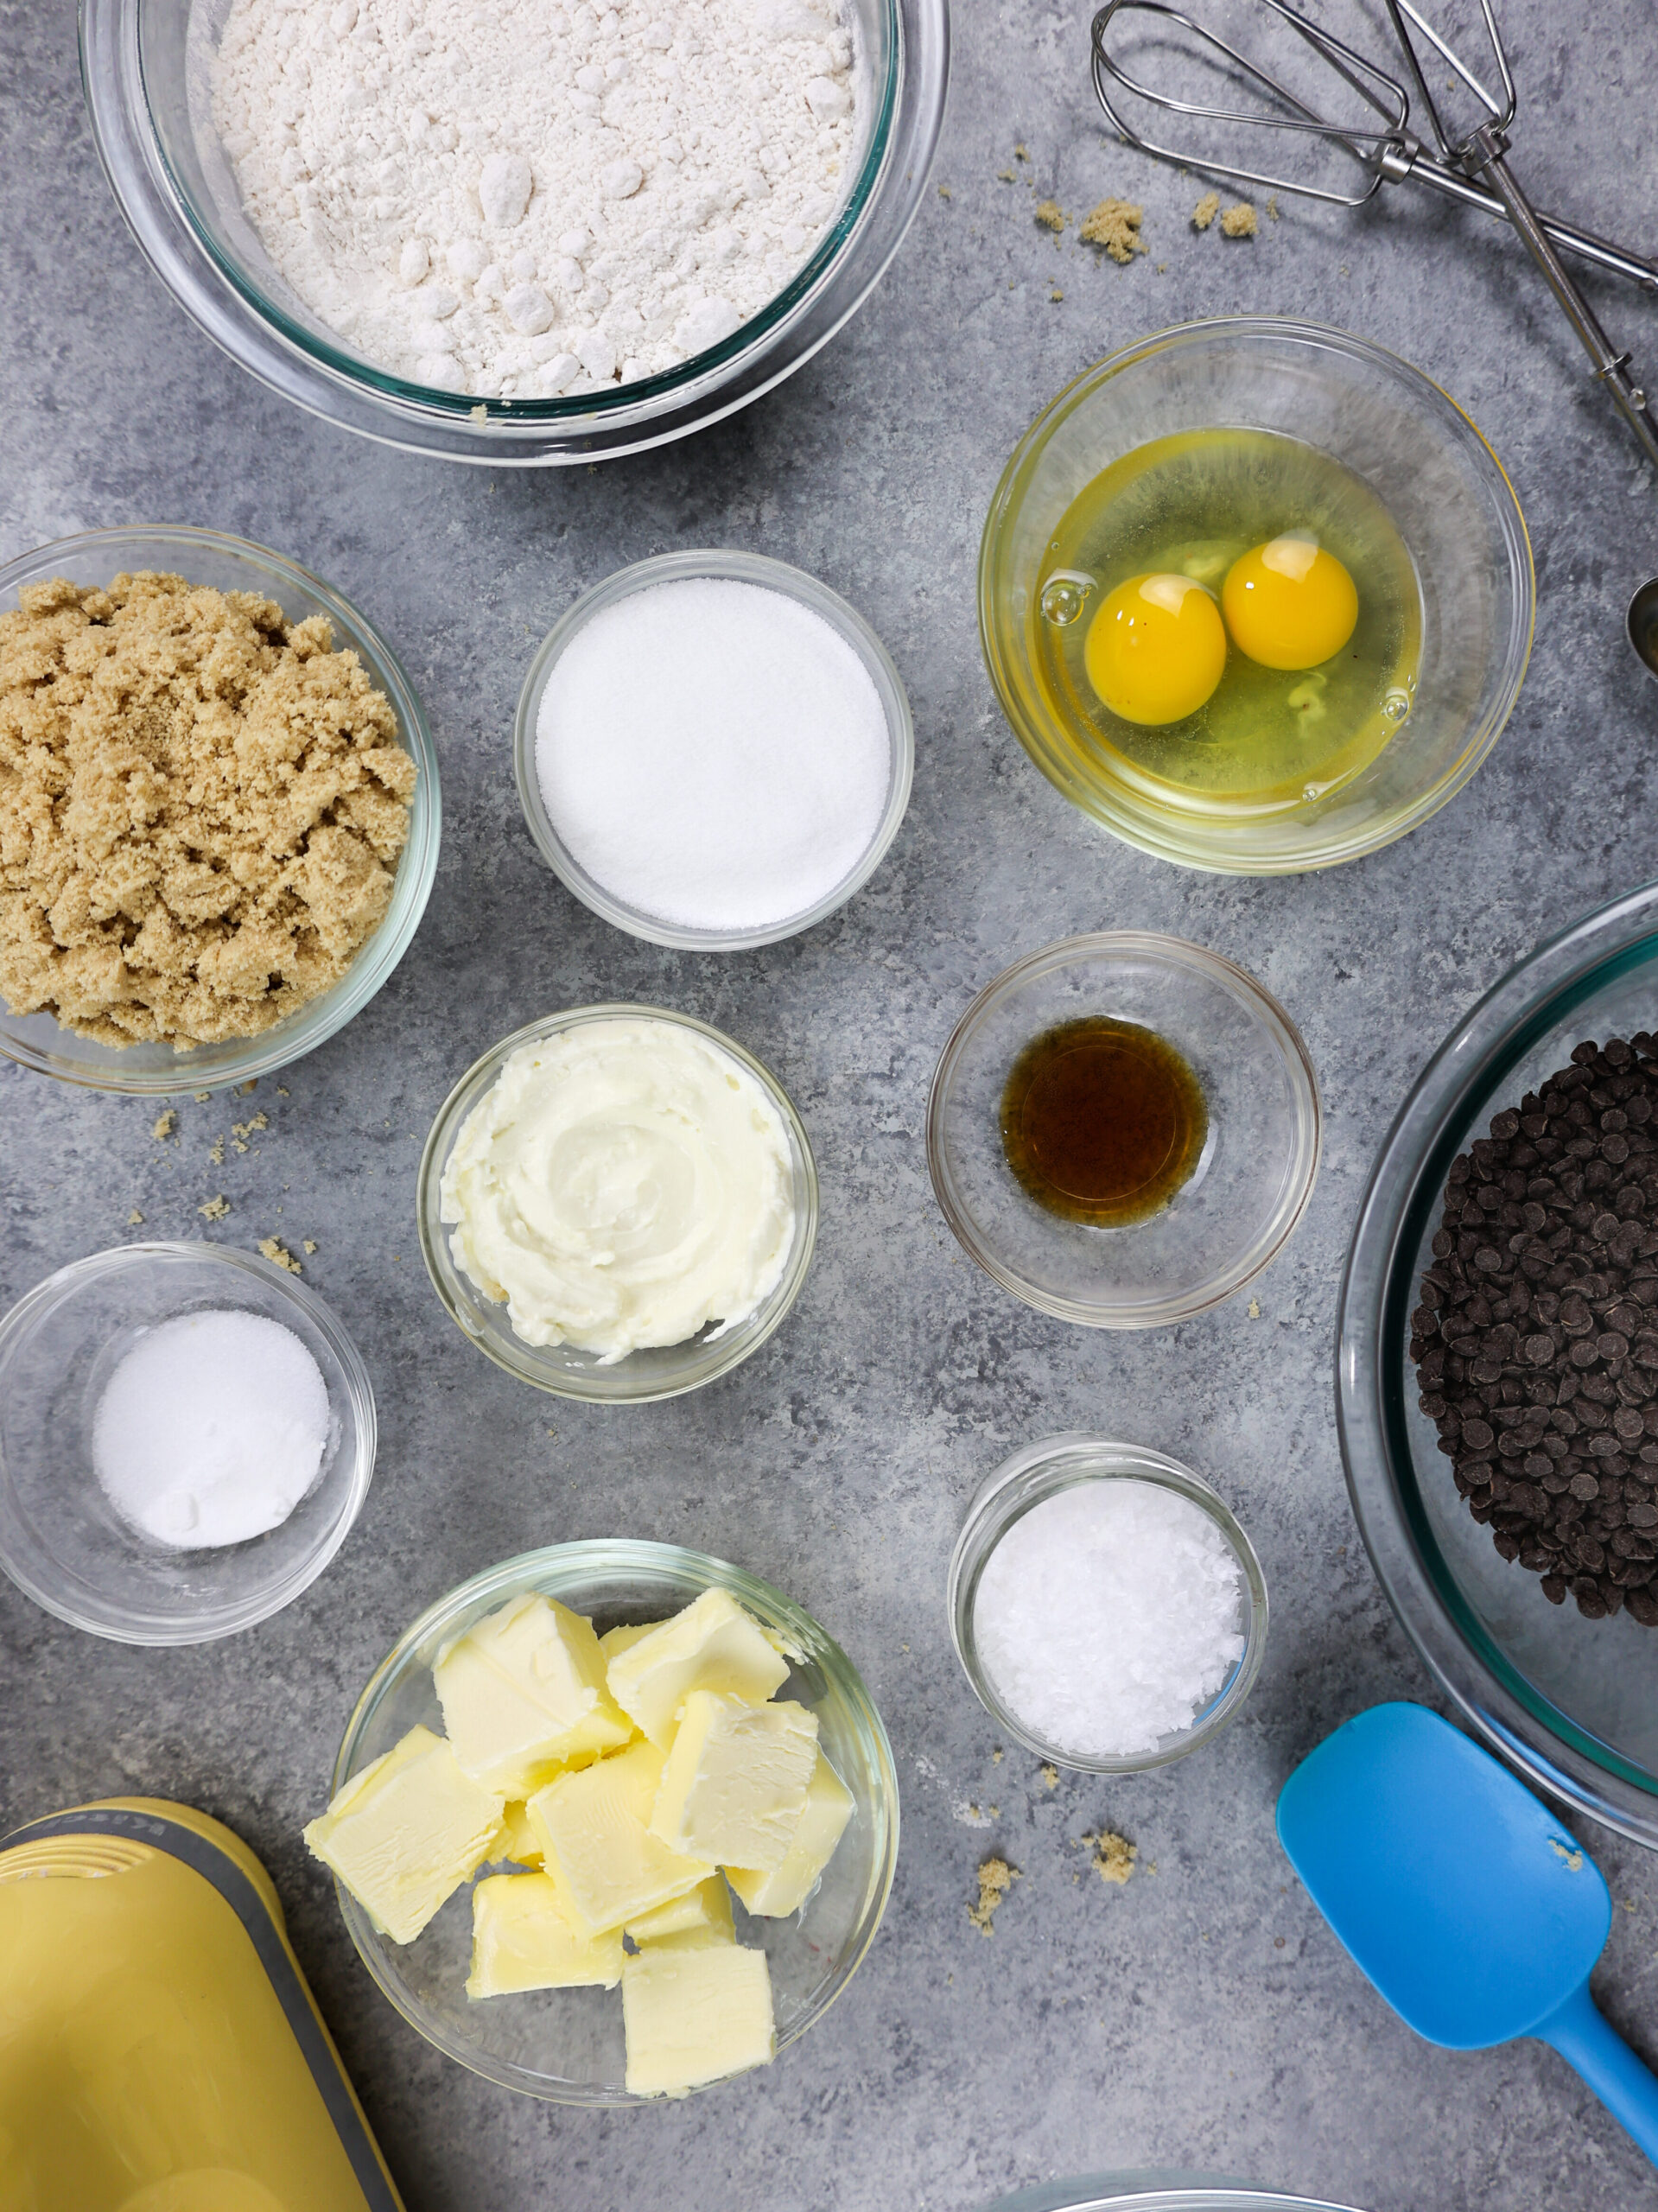 image of ingredients laid out on a counter to make cream cheese chocolate chip cookies